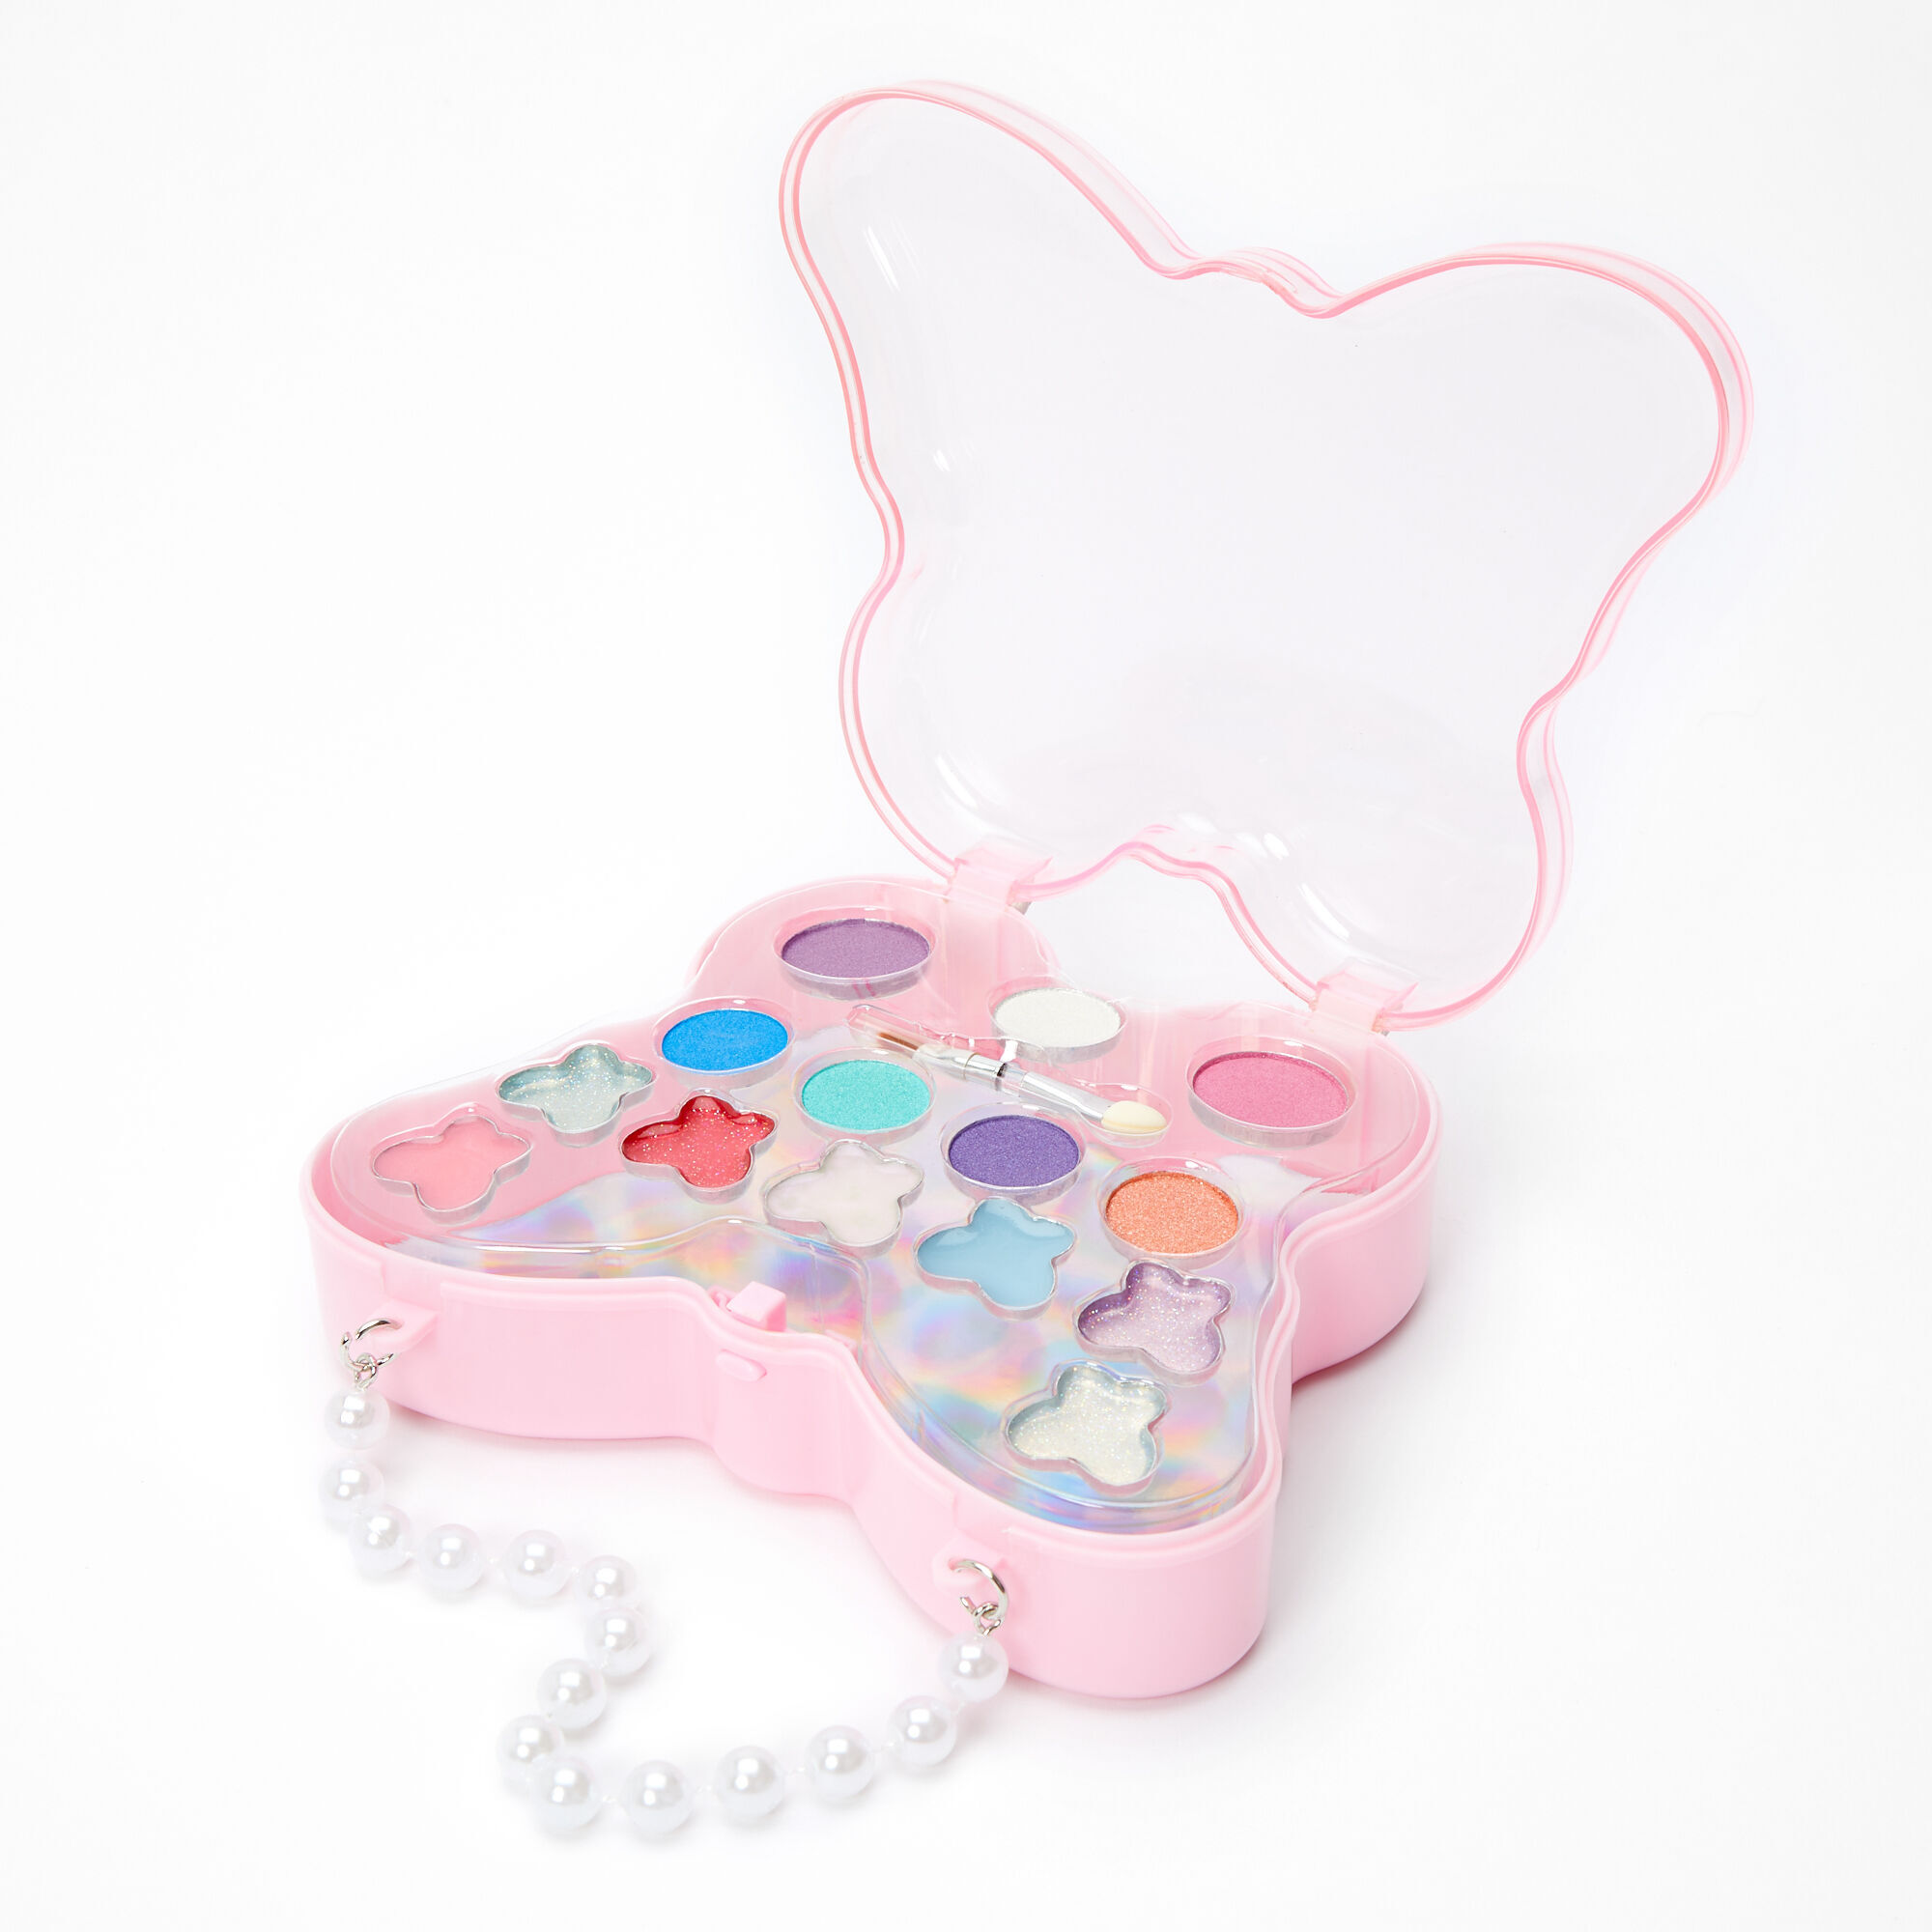 View Claires Club Butterfly Purse Makeup Set information